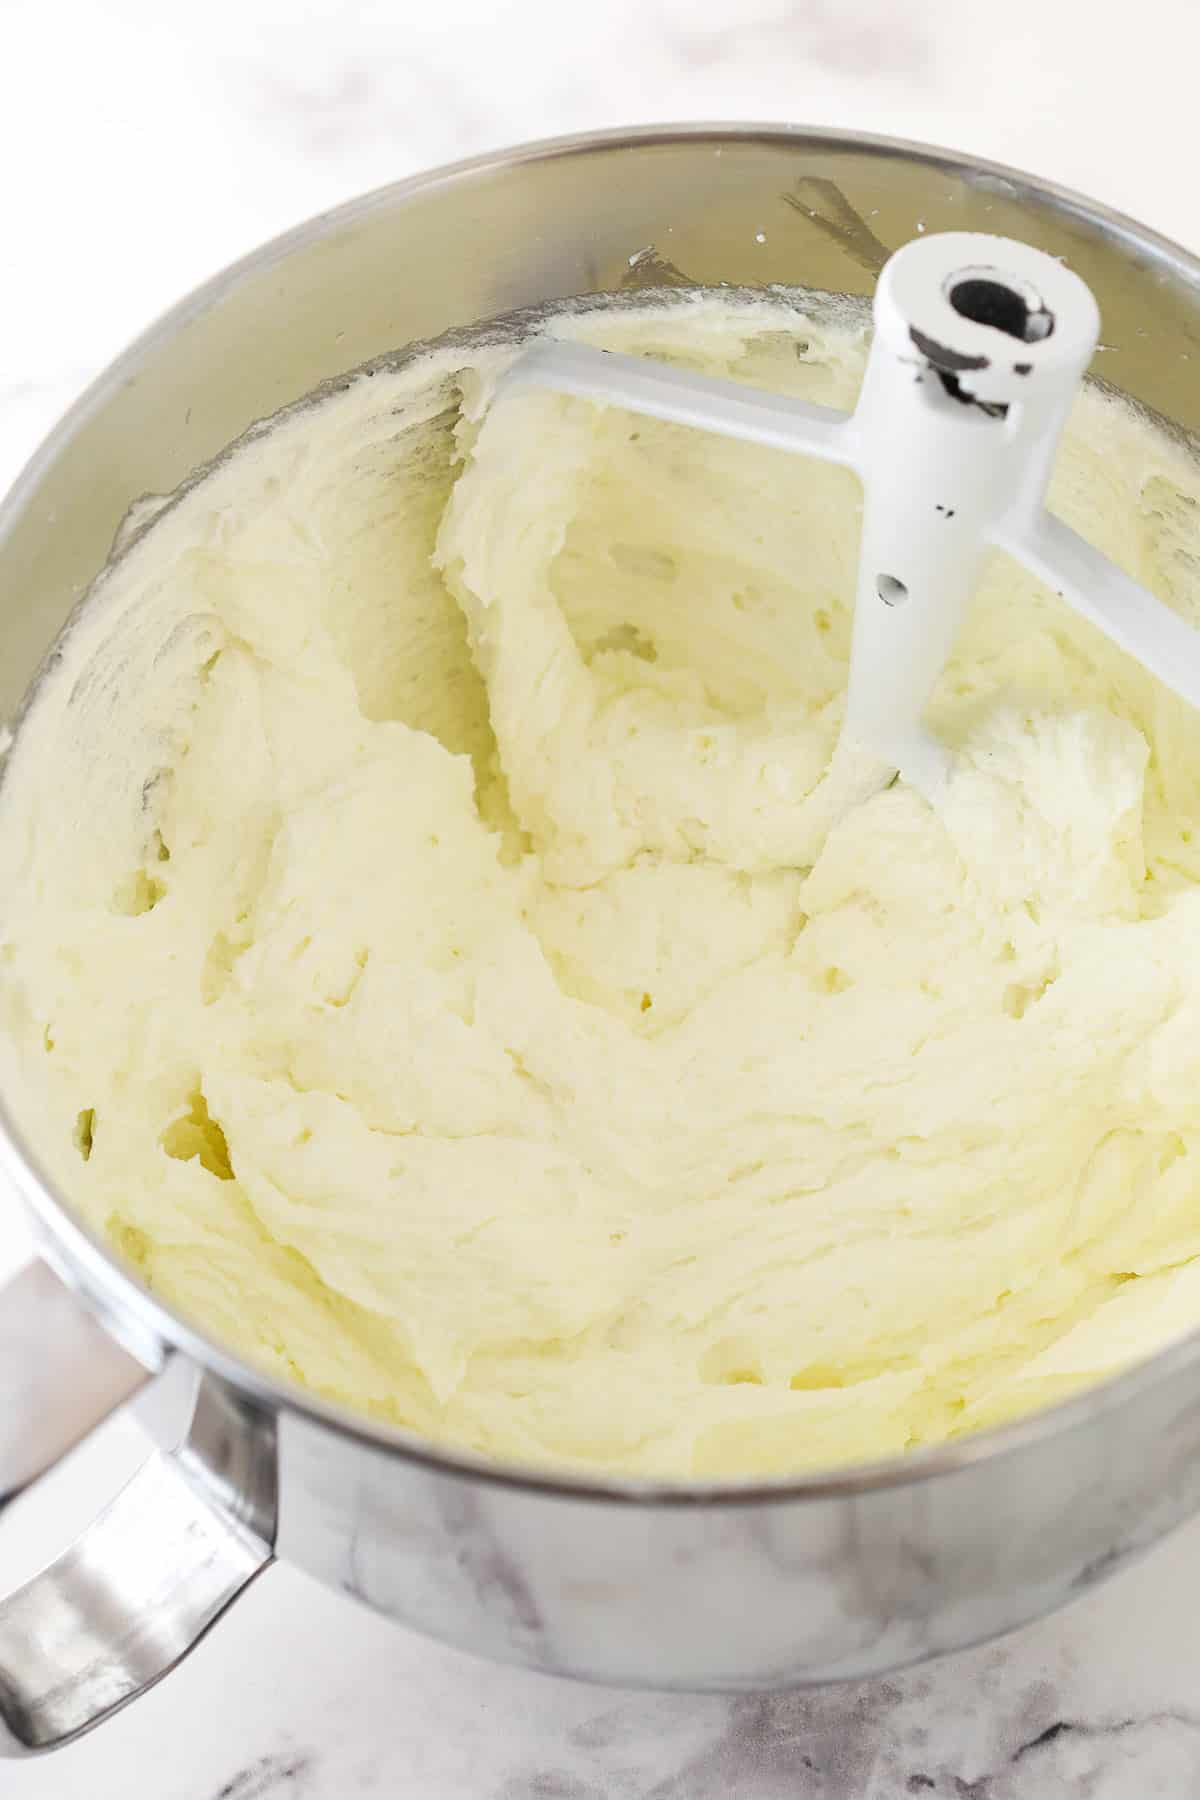 The cream cheese pound cake batter after the sugar has been incorporated